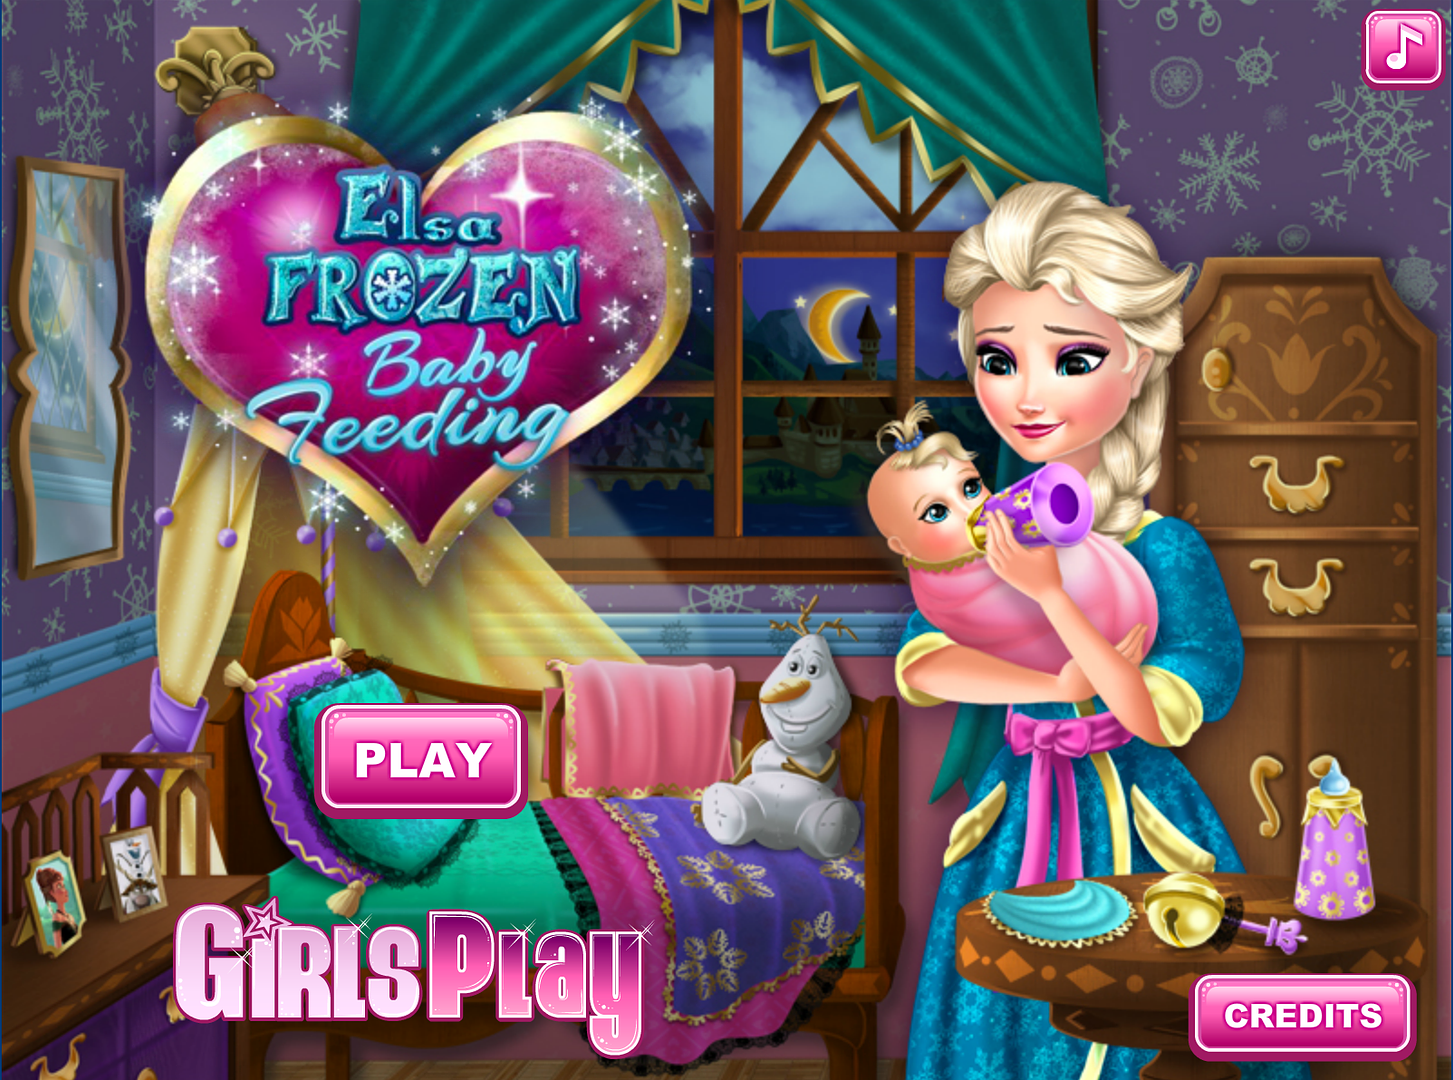 Elsa Frozen Baby Feeding and other unlicensed Frozen games for kids